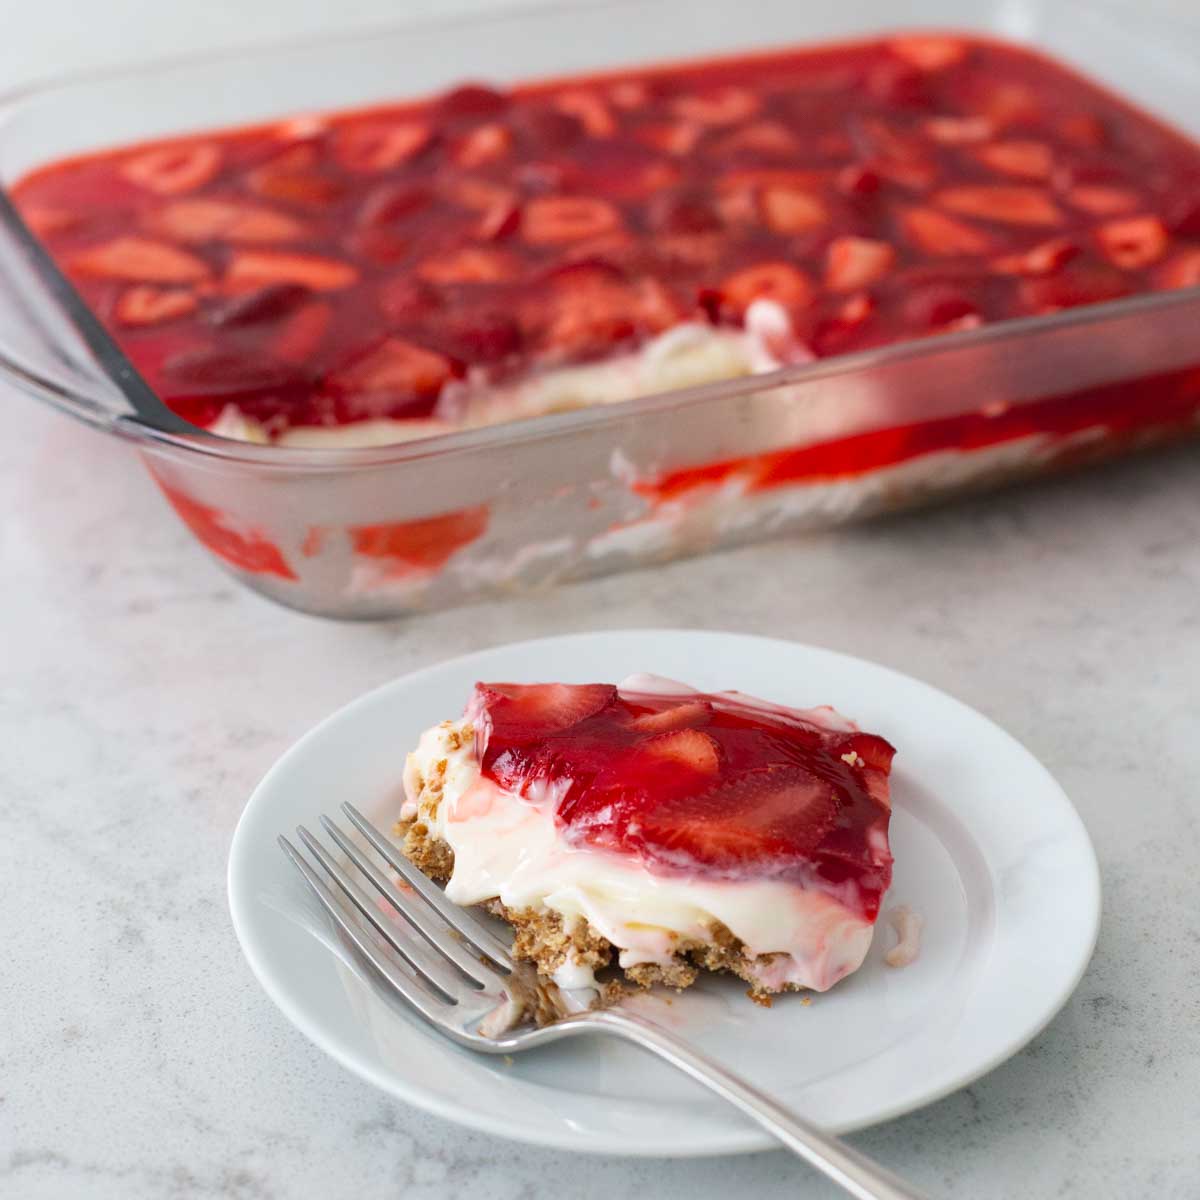 A 9x13-inch pan has finished strawberry pretzel salad for serving, a plate with a single slice and a fork is in front.